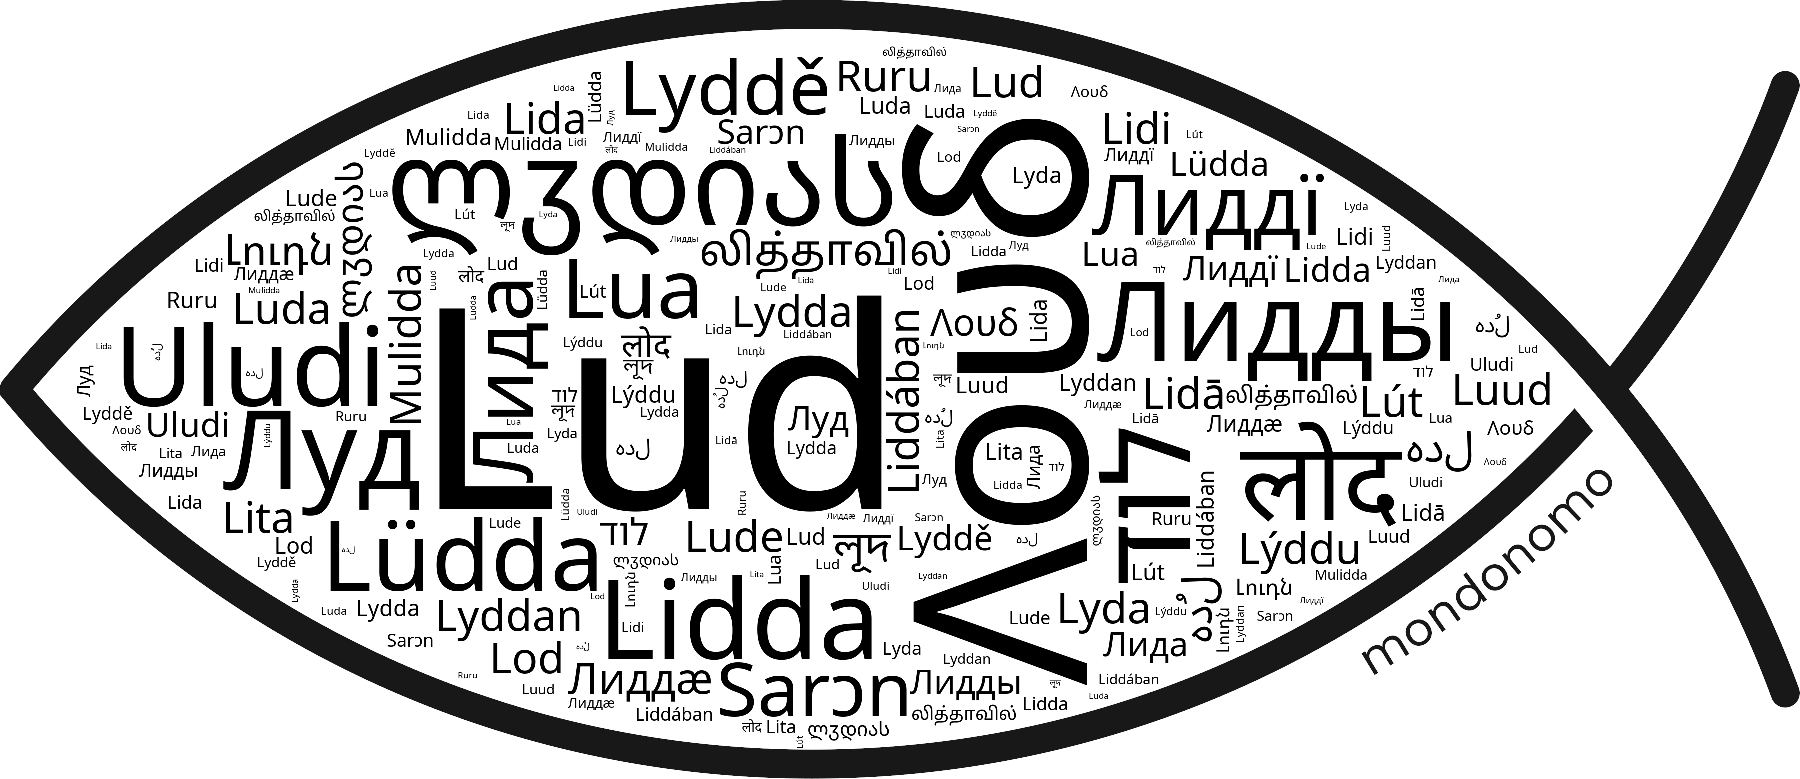 Name Lud in the world's Bibles